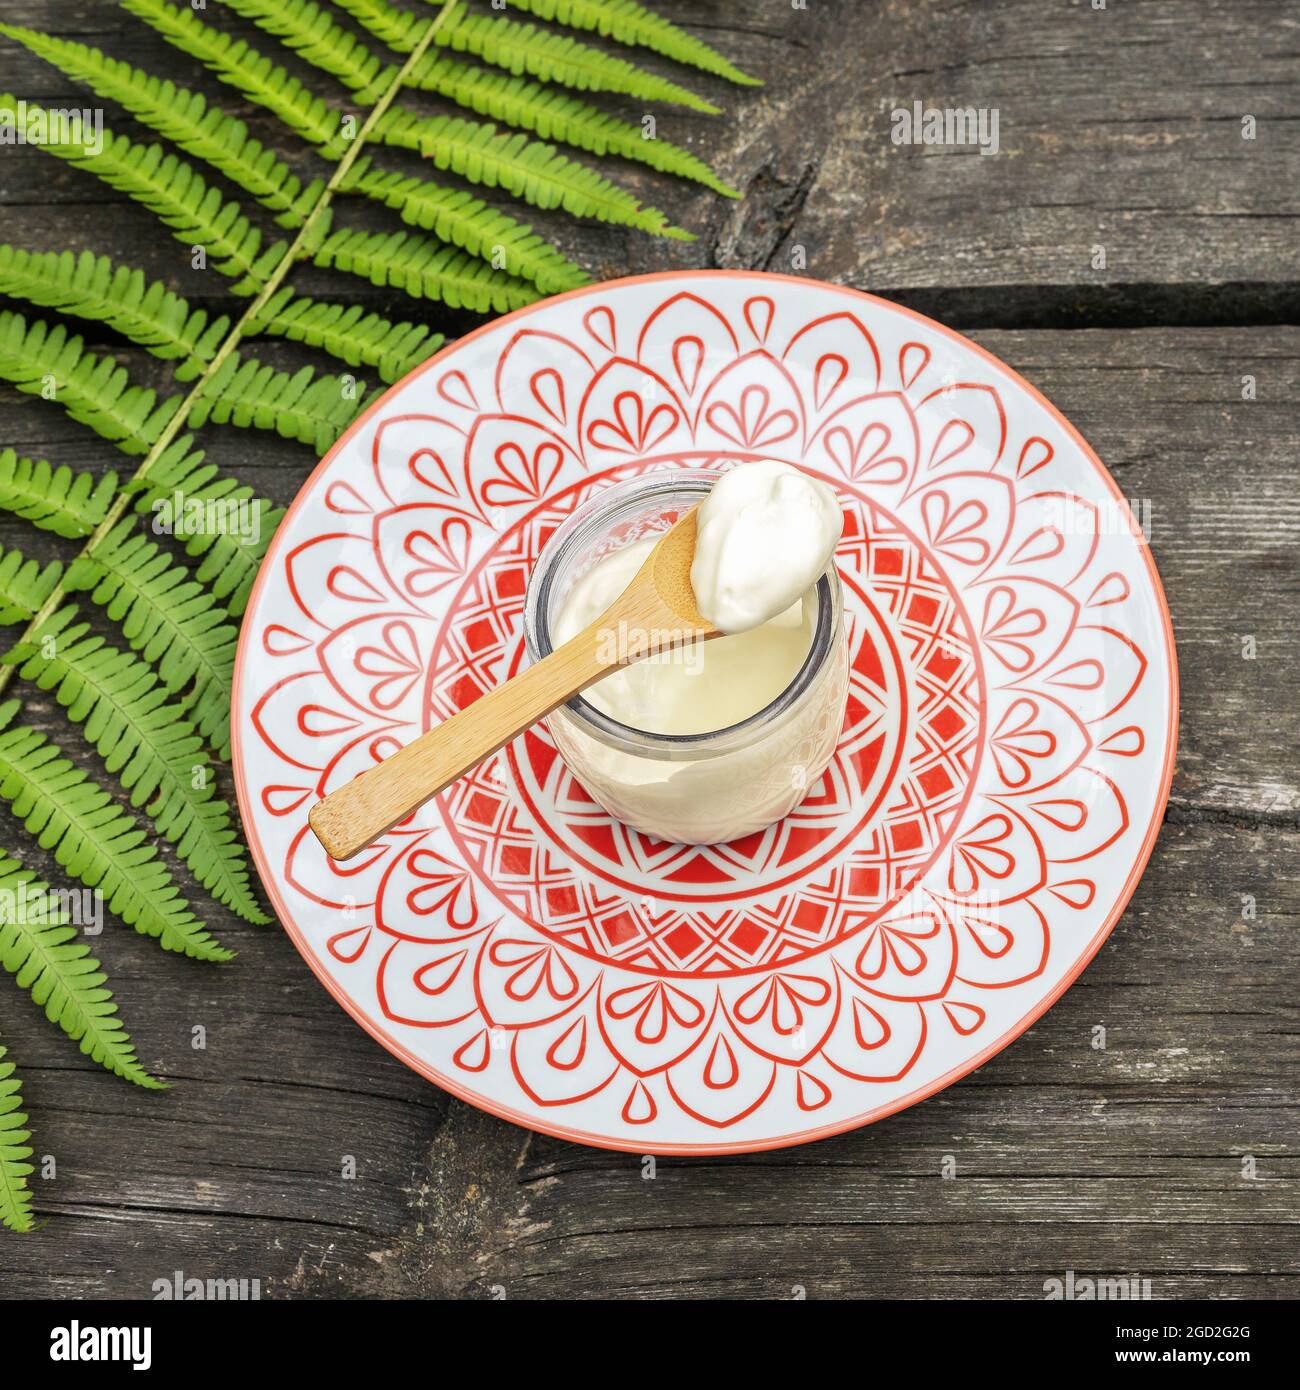 Eco friendly, food composition with organic, vegan, homemade yogurt with wooden spoon and fern leave on a wooden table. Dairy-free yogurt. Product for Stock Photo